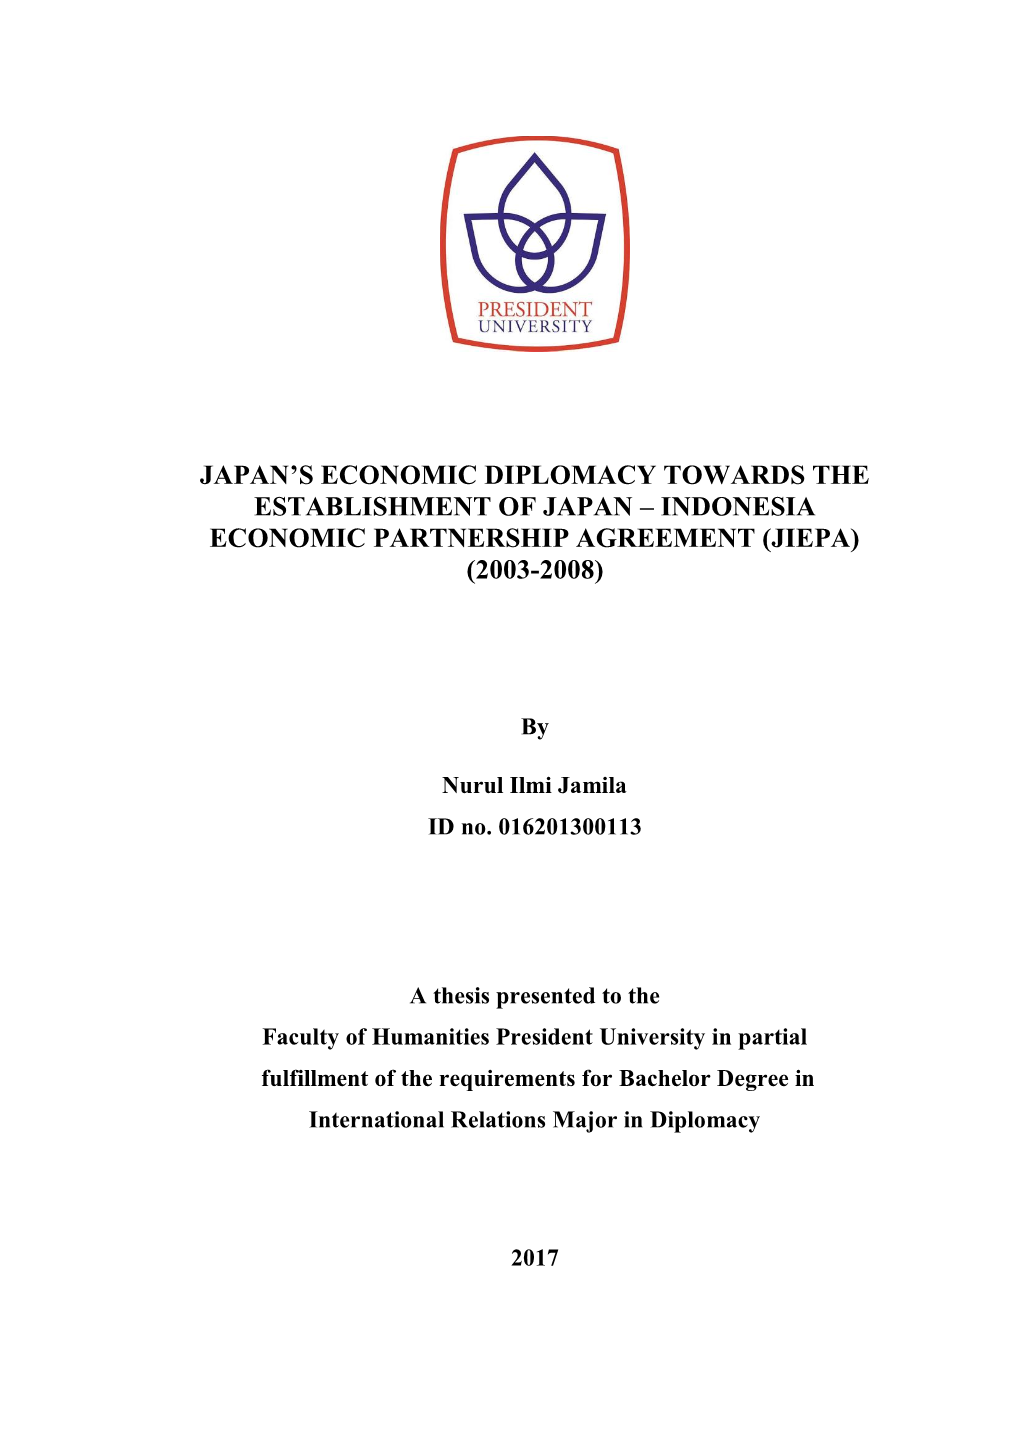 Japan's Economic Diplomacy Towards East Asia: Fragmented Realism and Naive Liberalism." S